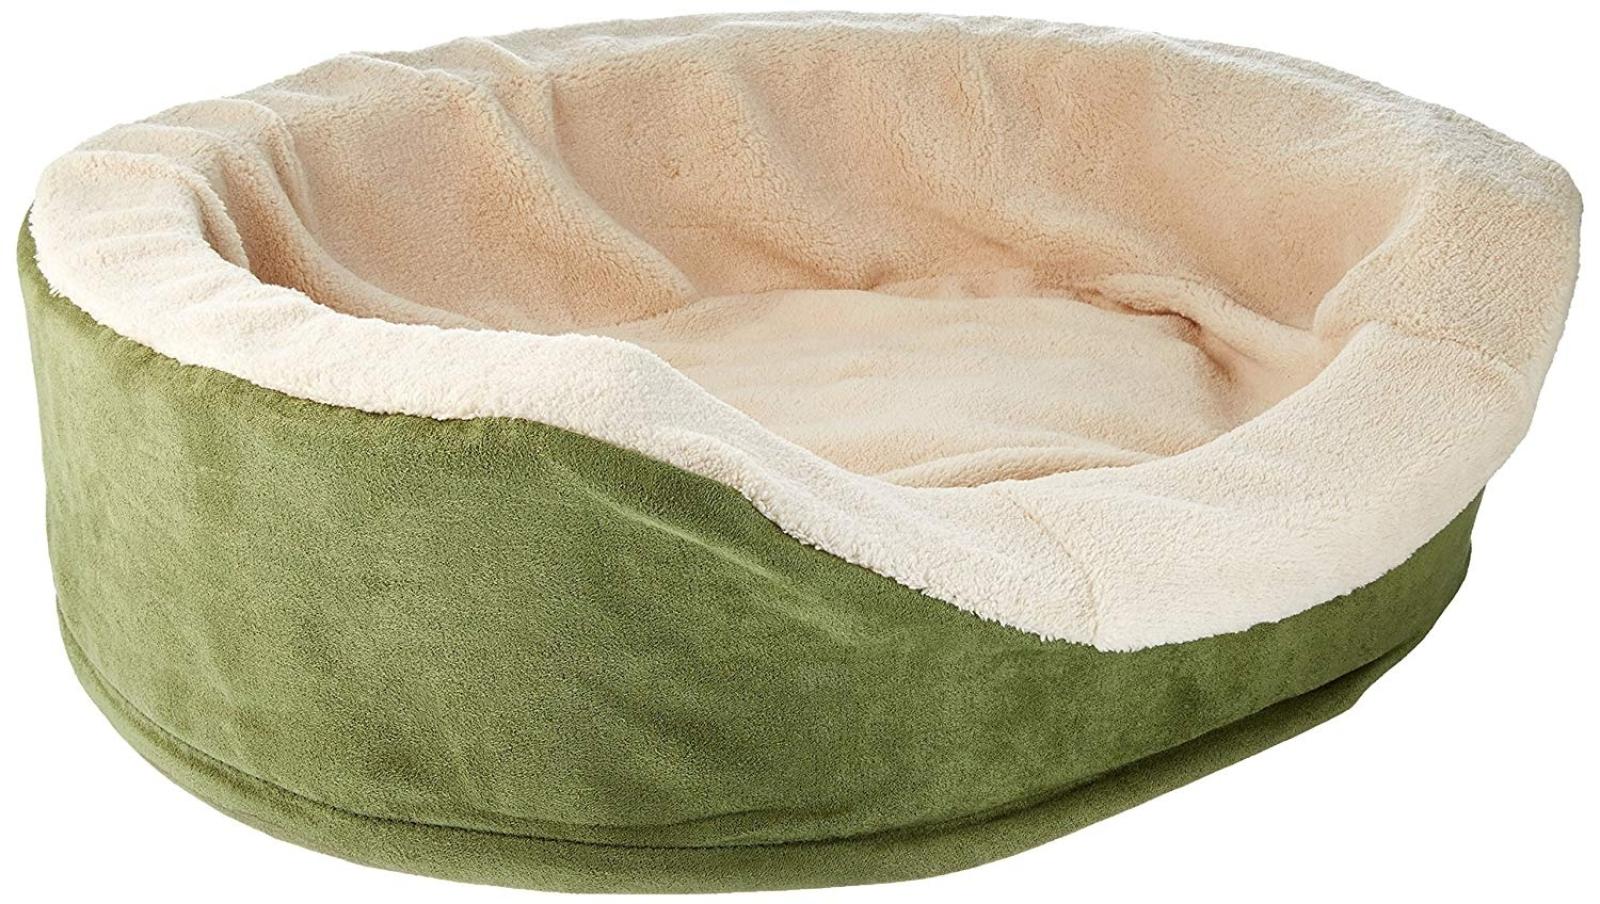 Petmate Twill Lounger Pet Bed